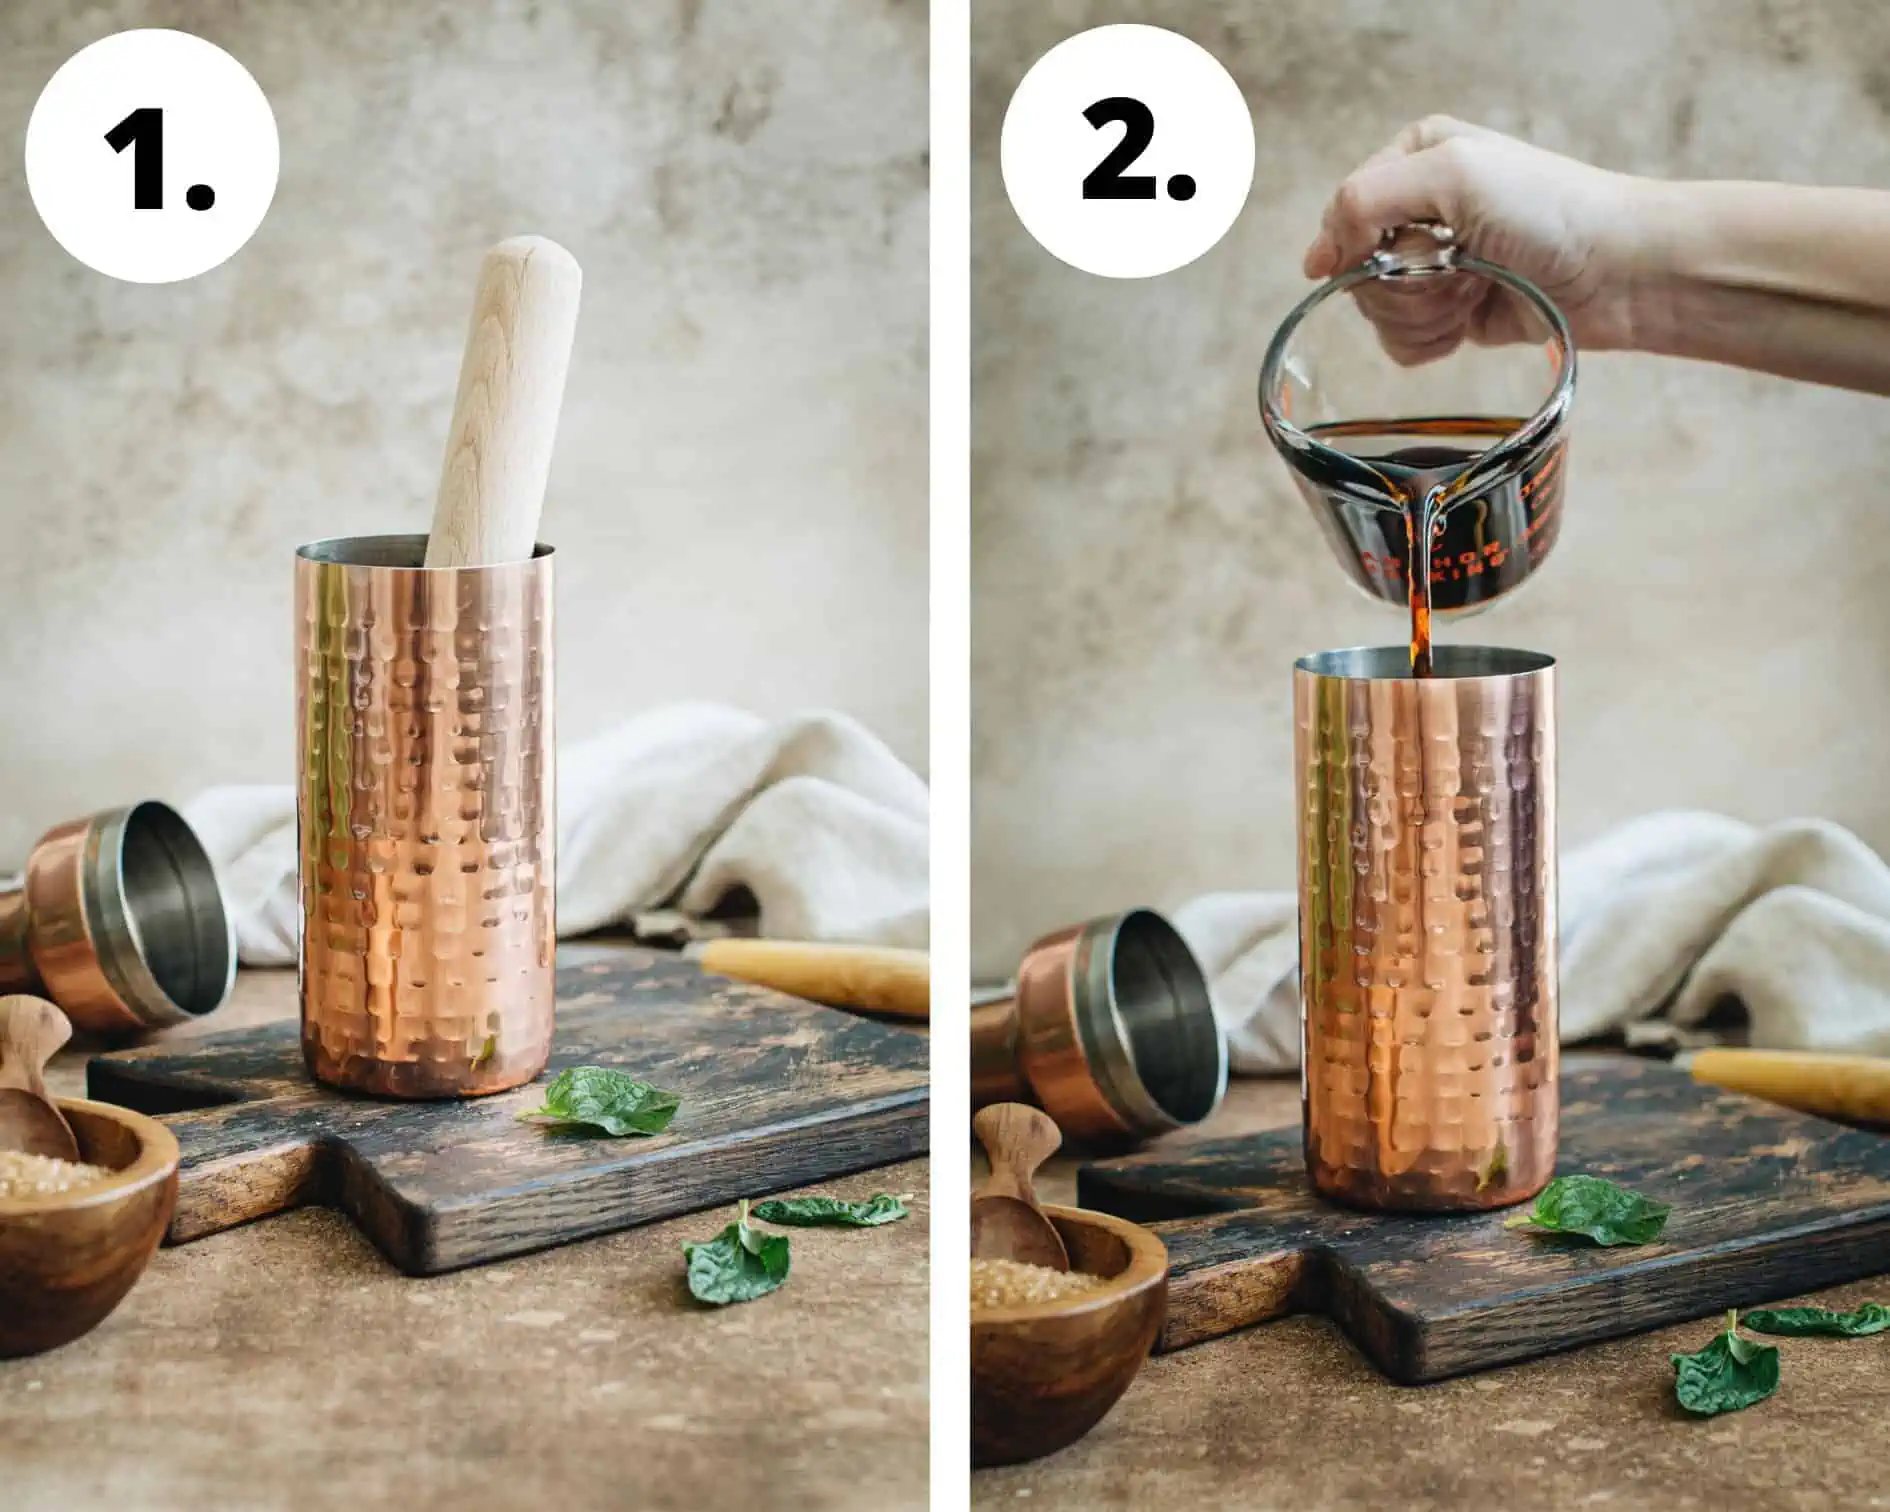 How to make a coffee mojito process steps 1 and 2.